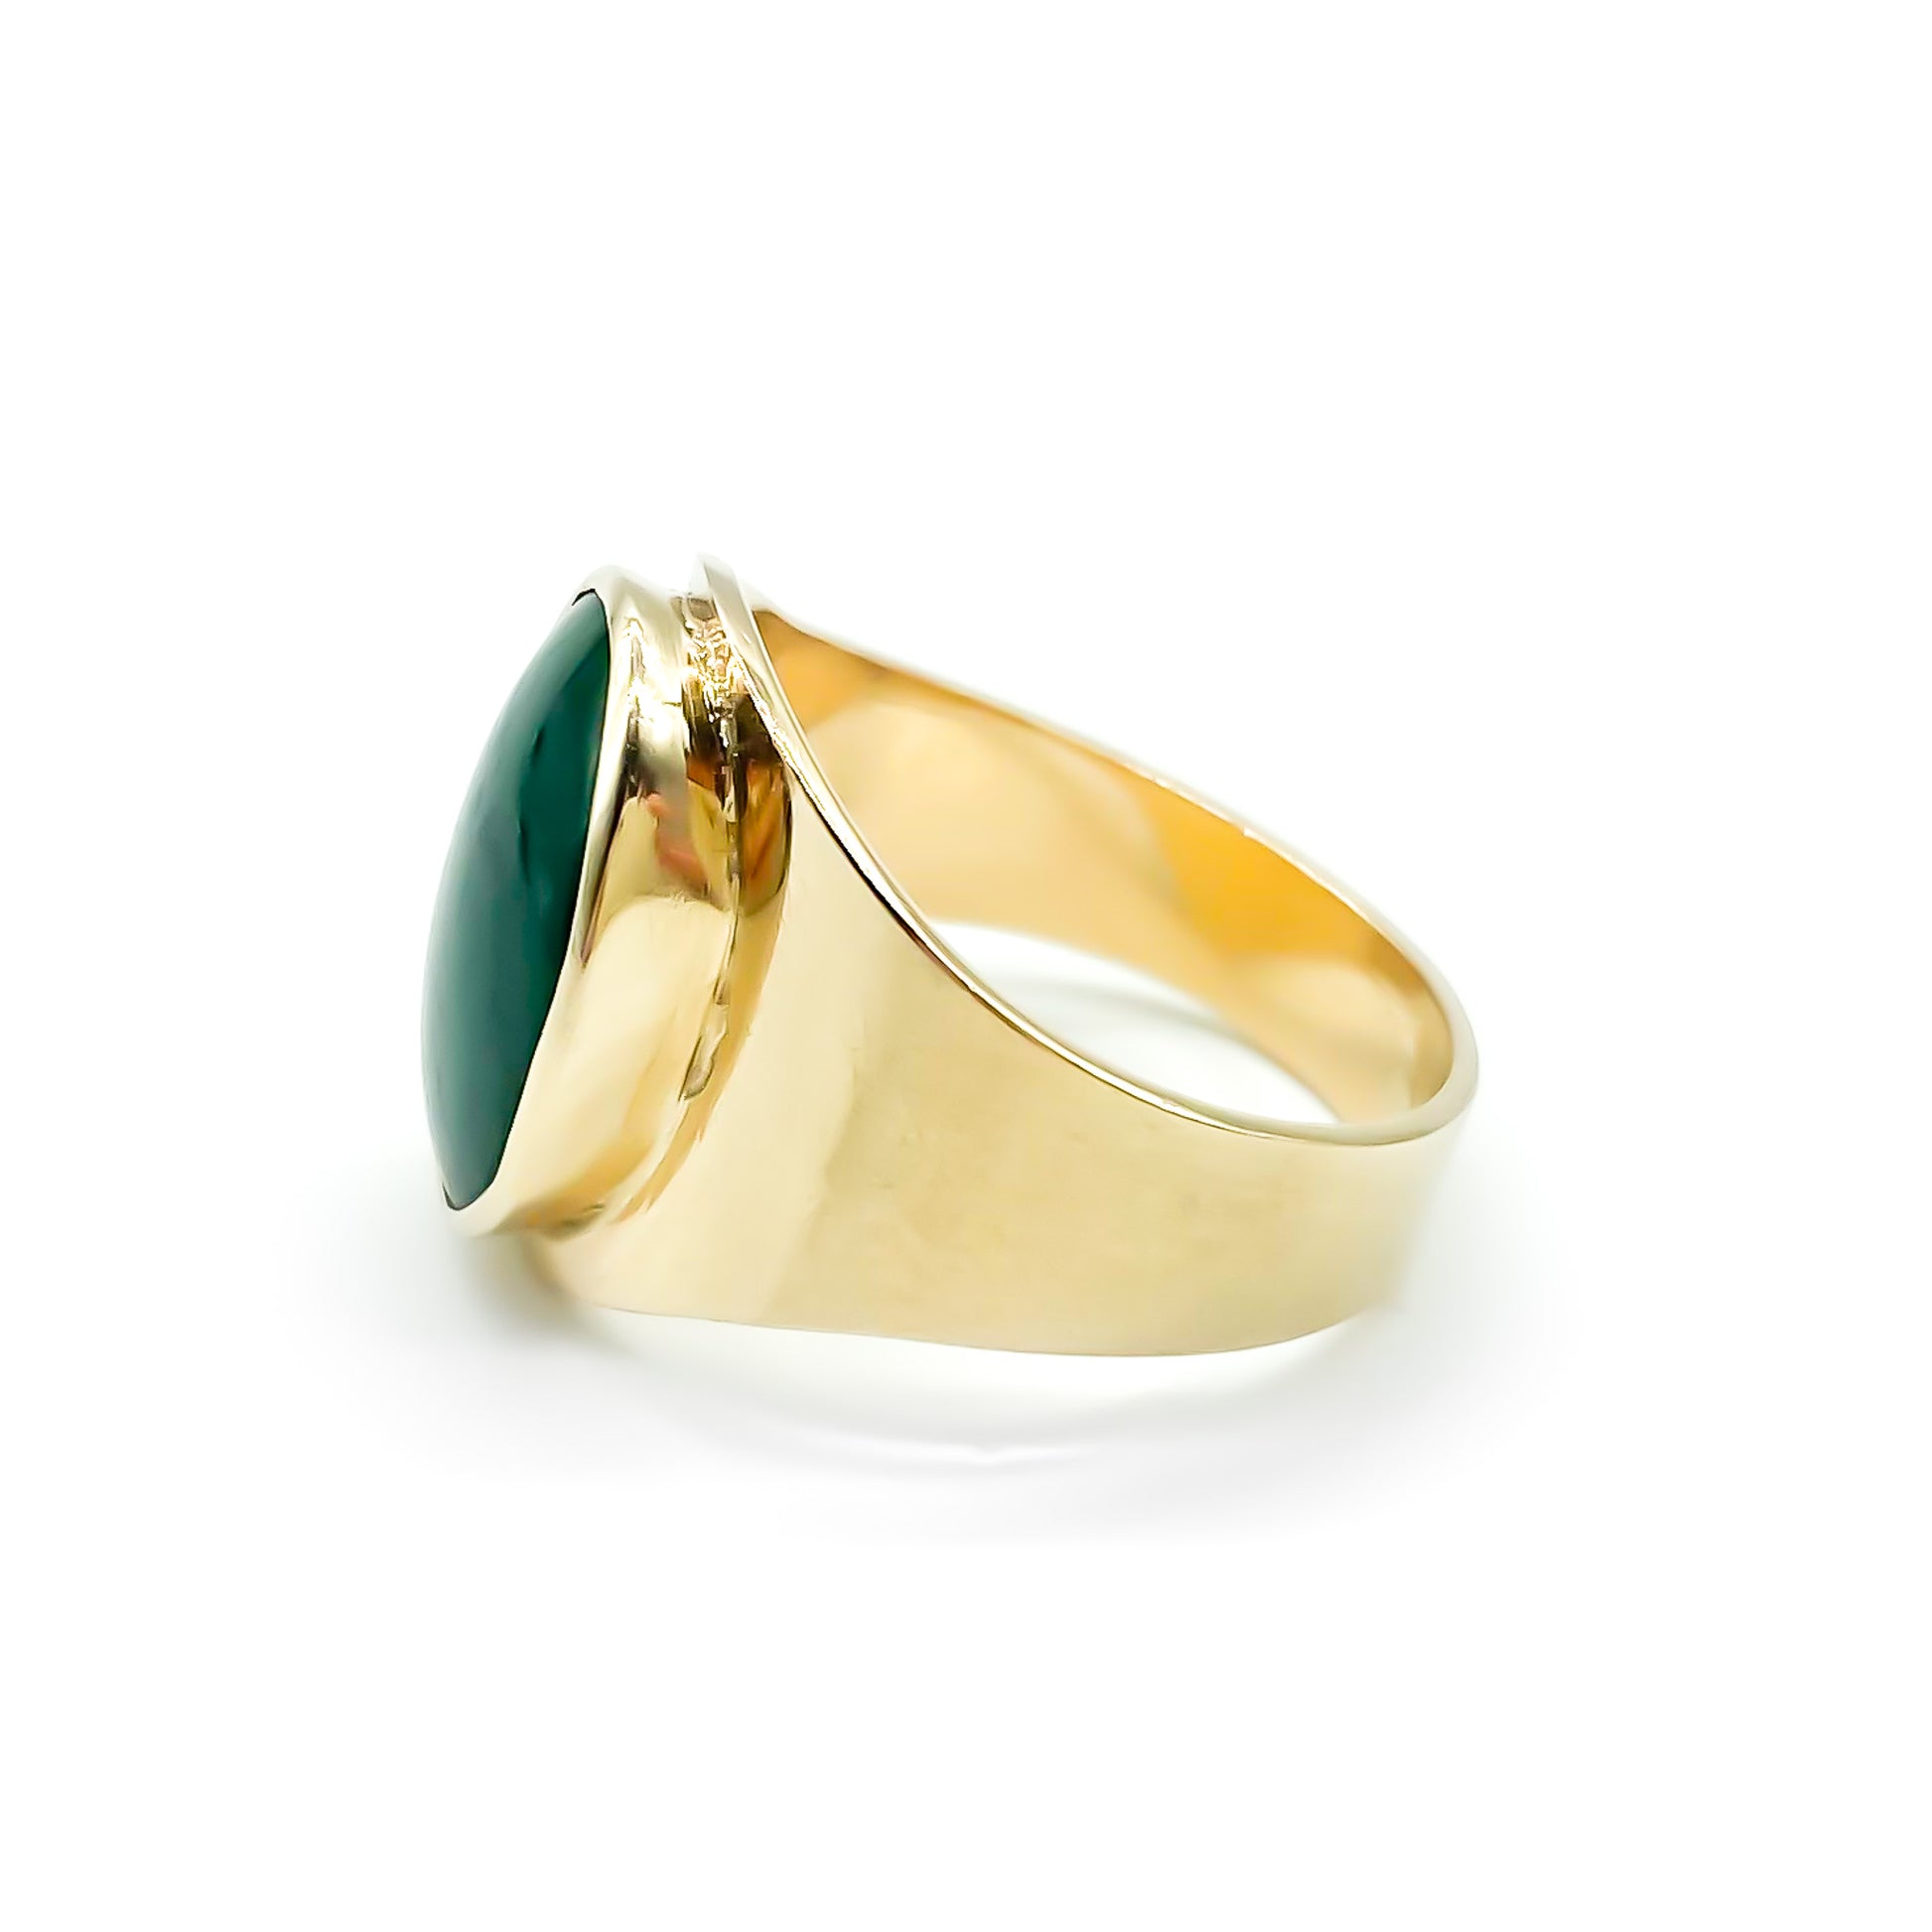 Lovely 9ct gold ring set with a beautiful dark green cabochon jade stone.